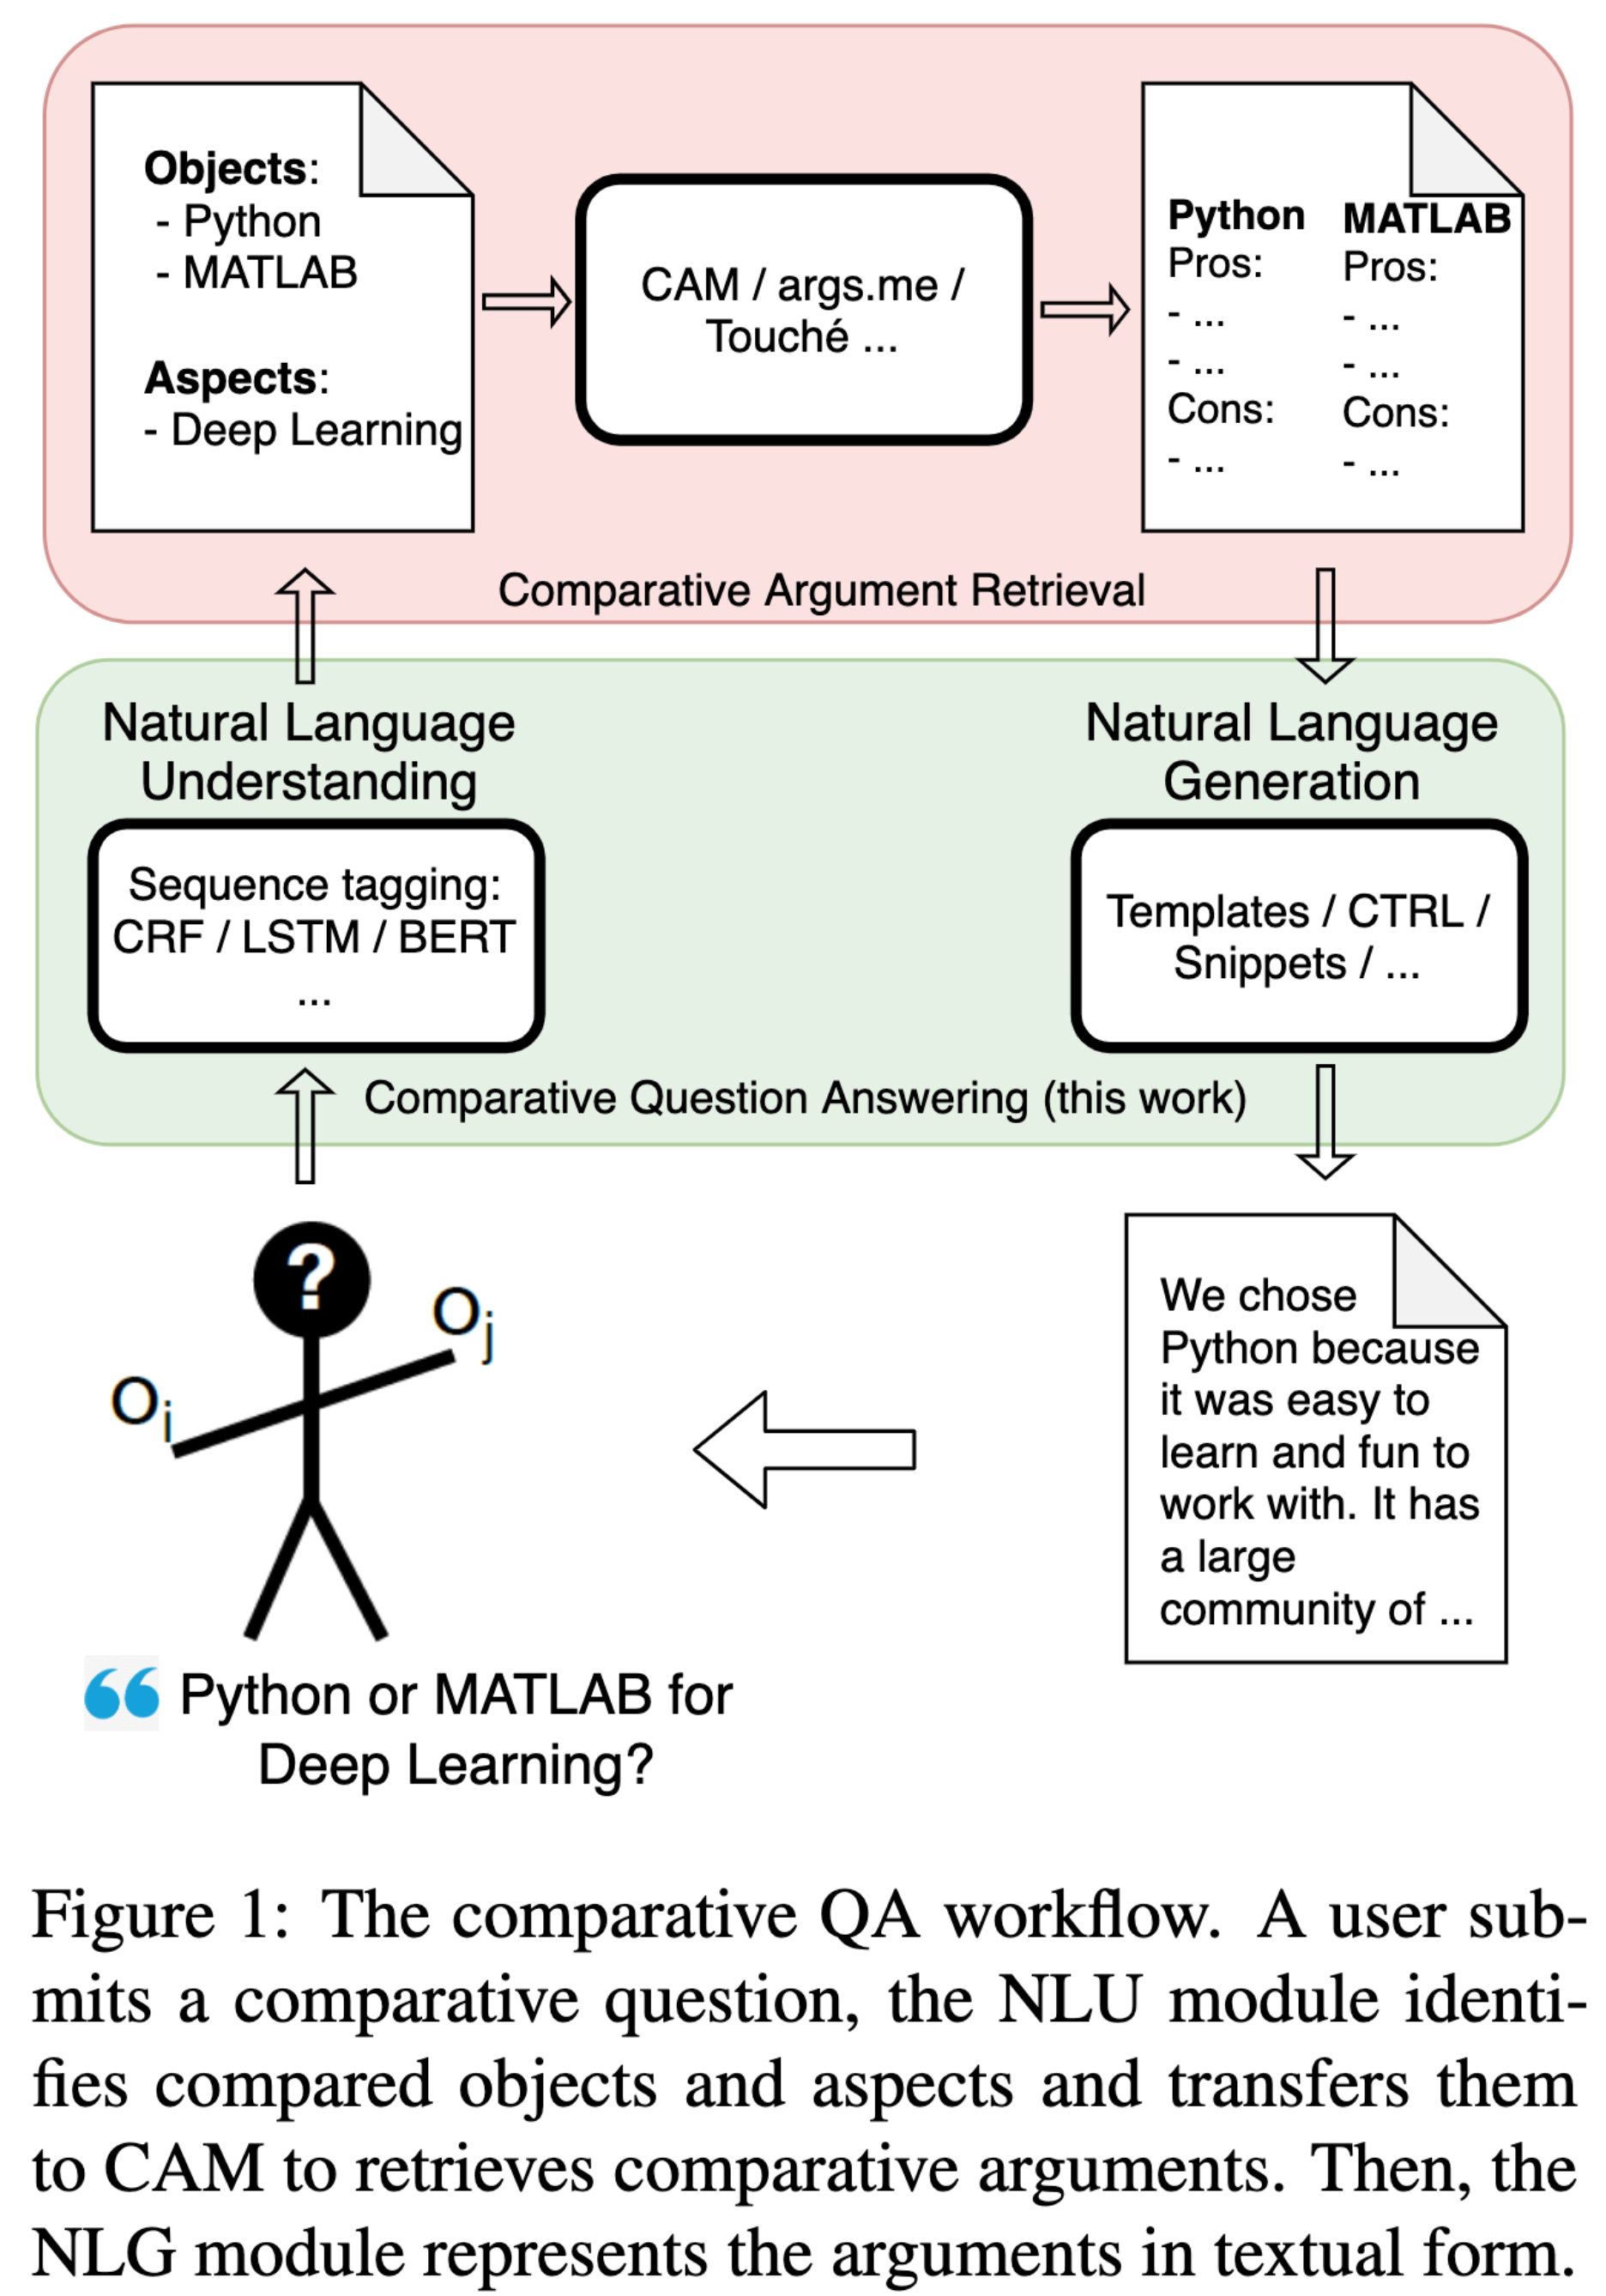 Figure of the comparative QA workflow